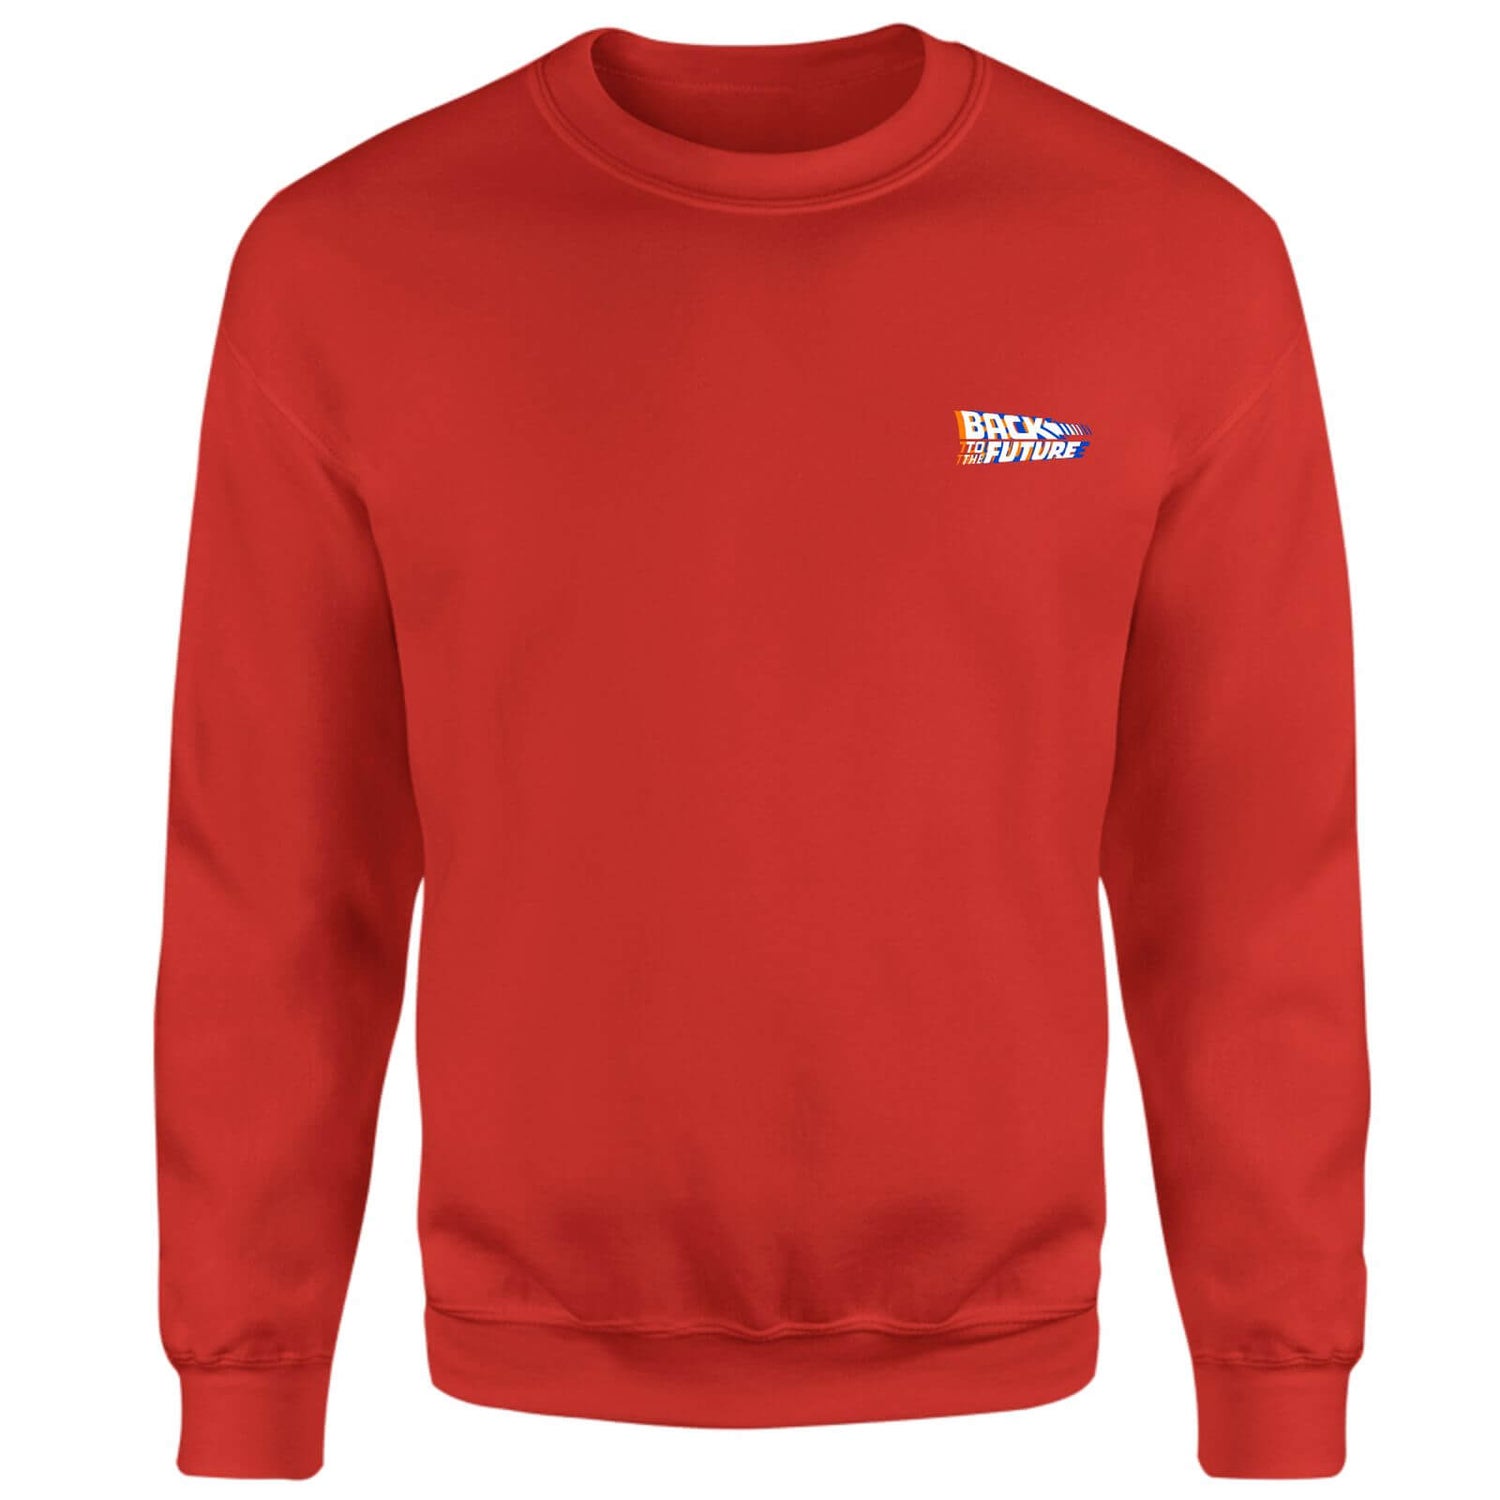 Back To The Future Sweatshirt - Red